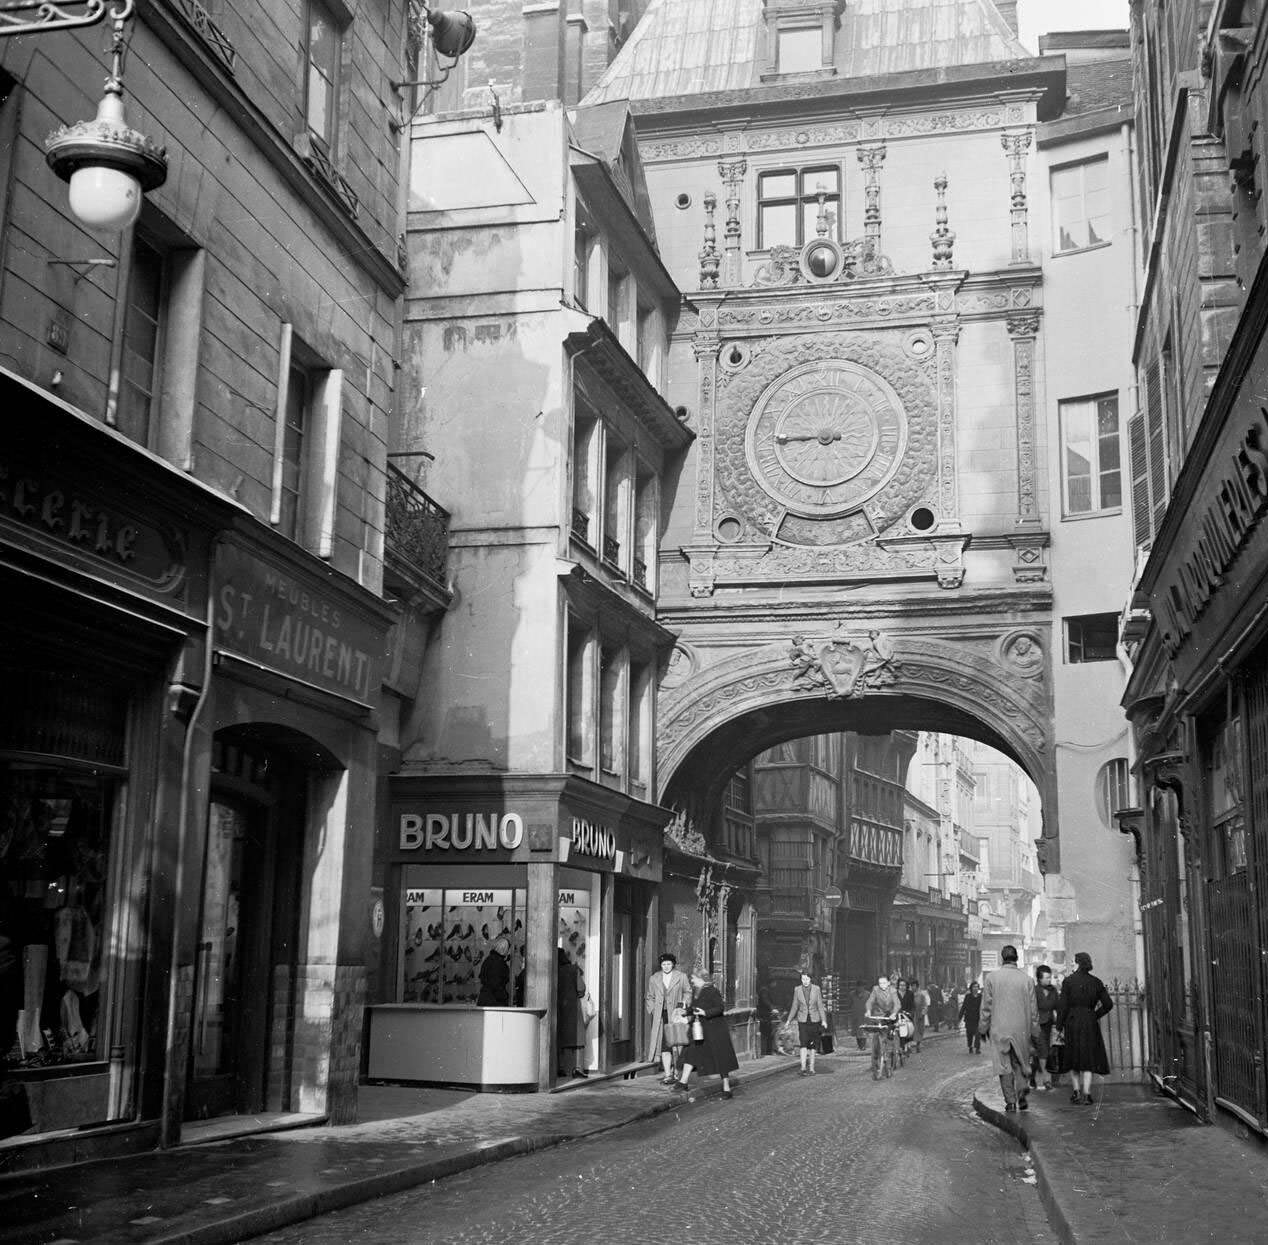 The Great Clock above a Street Archway in Rouen, France, 1950s